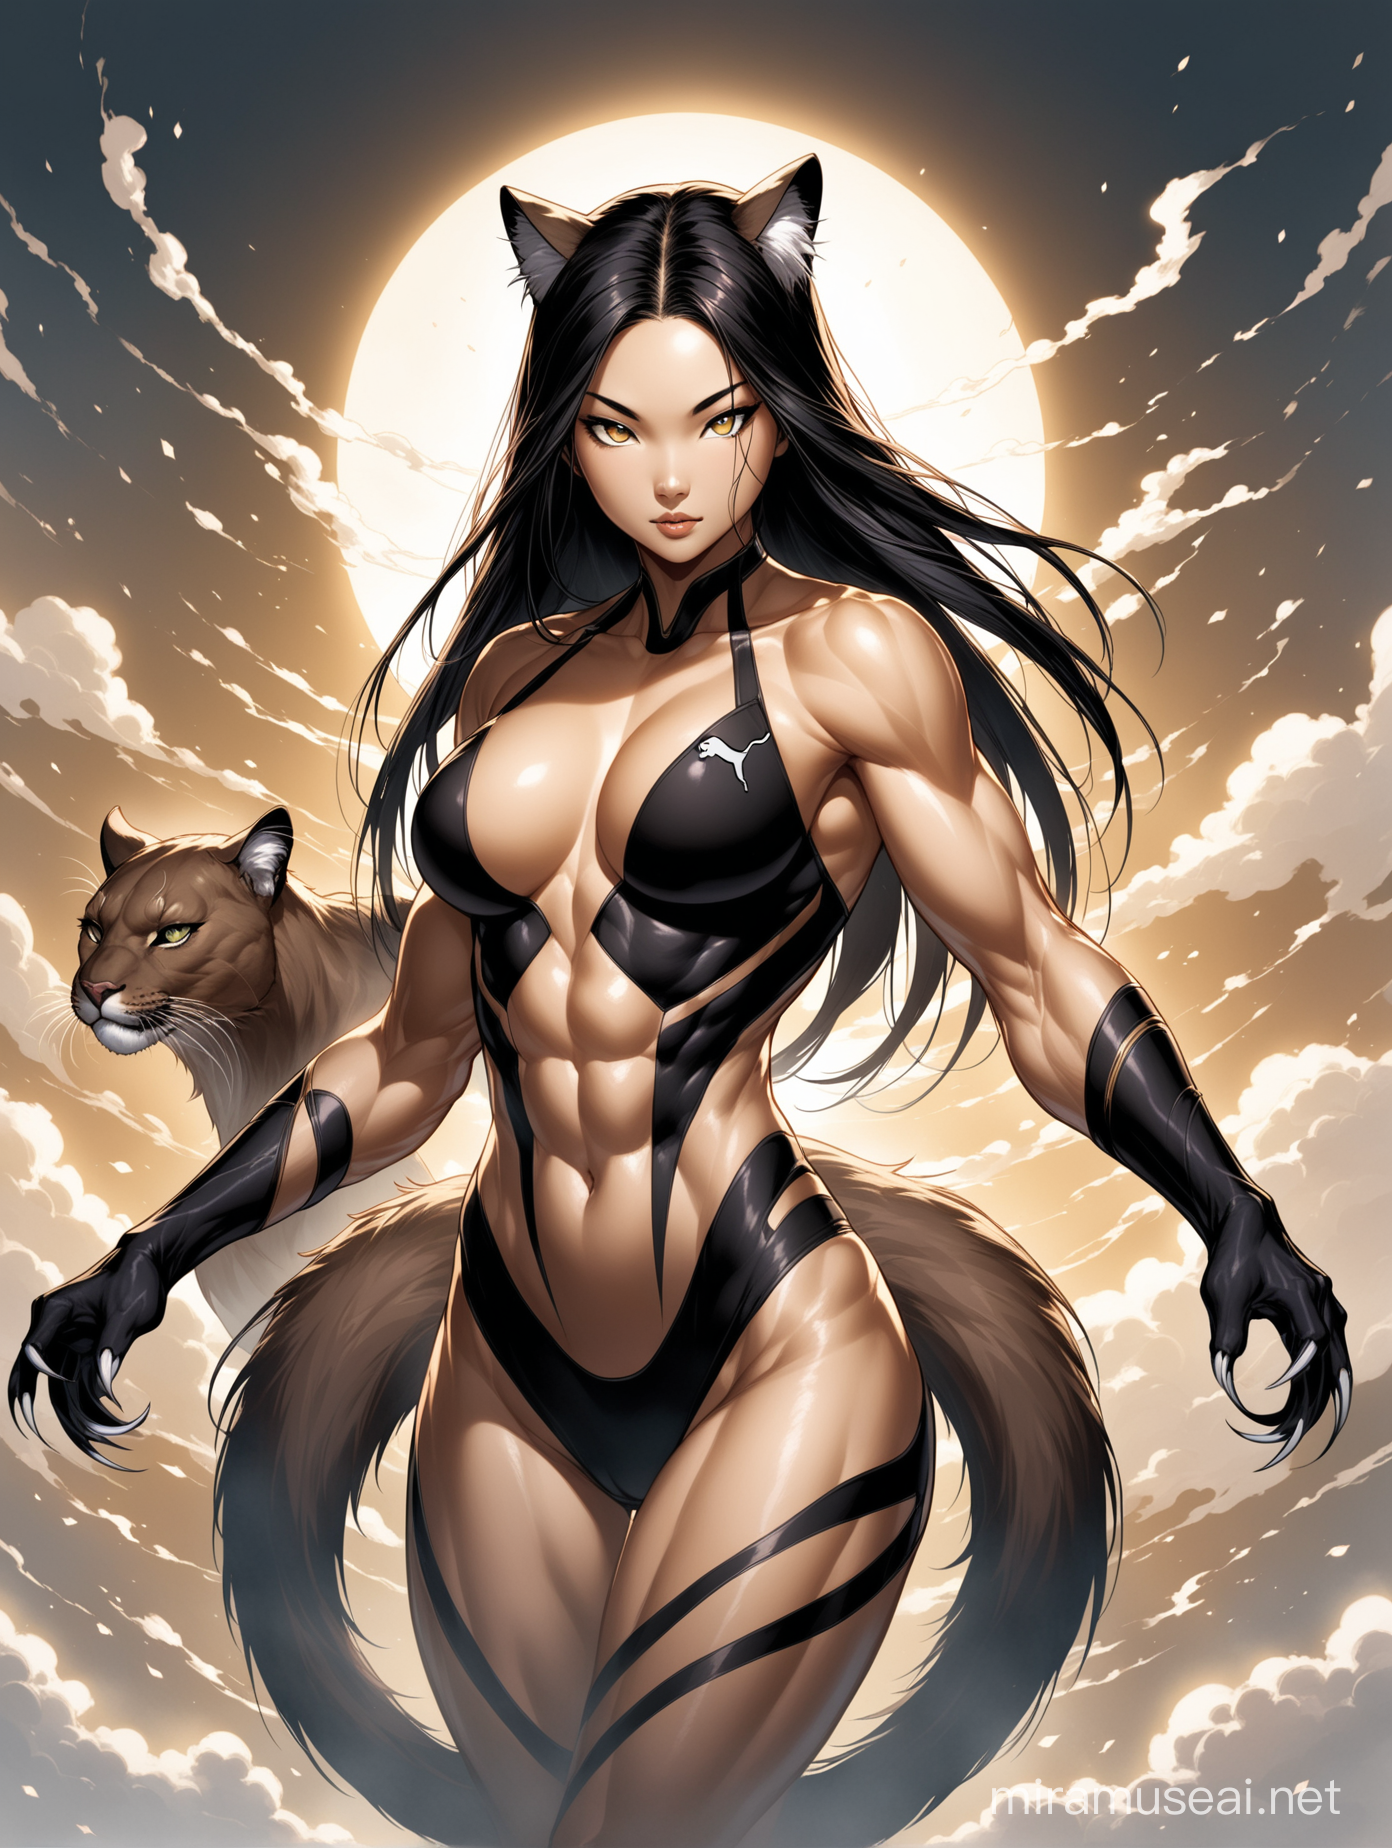 "Create an imaginative depiction of an Asian woman seamlessly merged with a puma, embodying the essence of a mutant. The woman possesses distinct Asian features, such as almond-shaped eyes, straight black hair, and a slender yet athletic build. Merge these features seamlessly with the sleek, powerful physique of a puma, incorporating elements like fur, claws, and feline facial characteristics. The image should convey a seamless blend of human and animal traits, evoking a sense of power, agility, and otherworldly presence typical of a mutant. Employing a style that captures the dynamic fusion of these elements, the image should exude creativity and evoke intrigue."